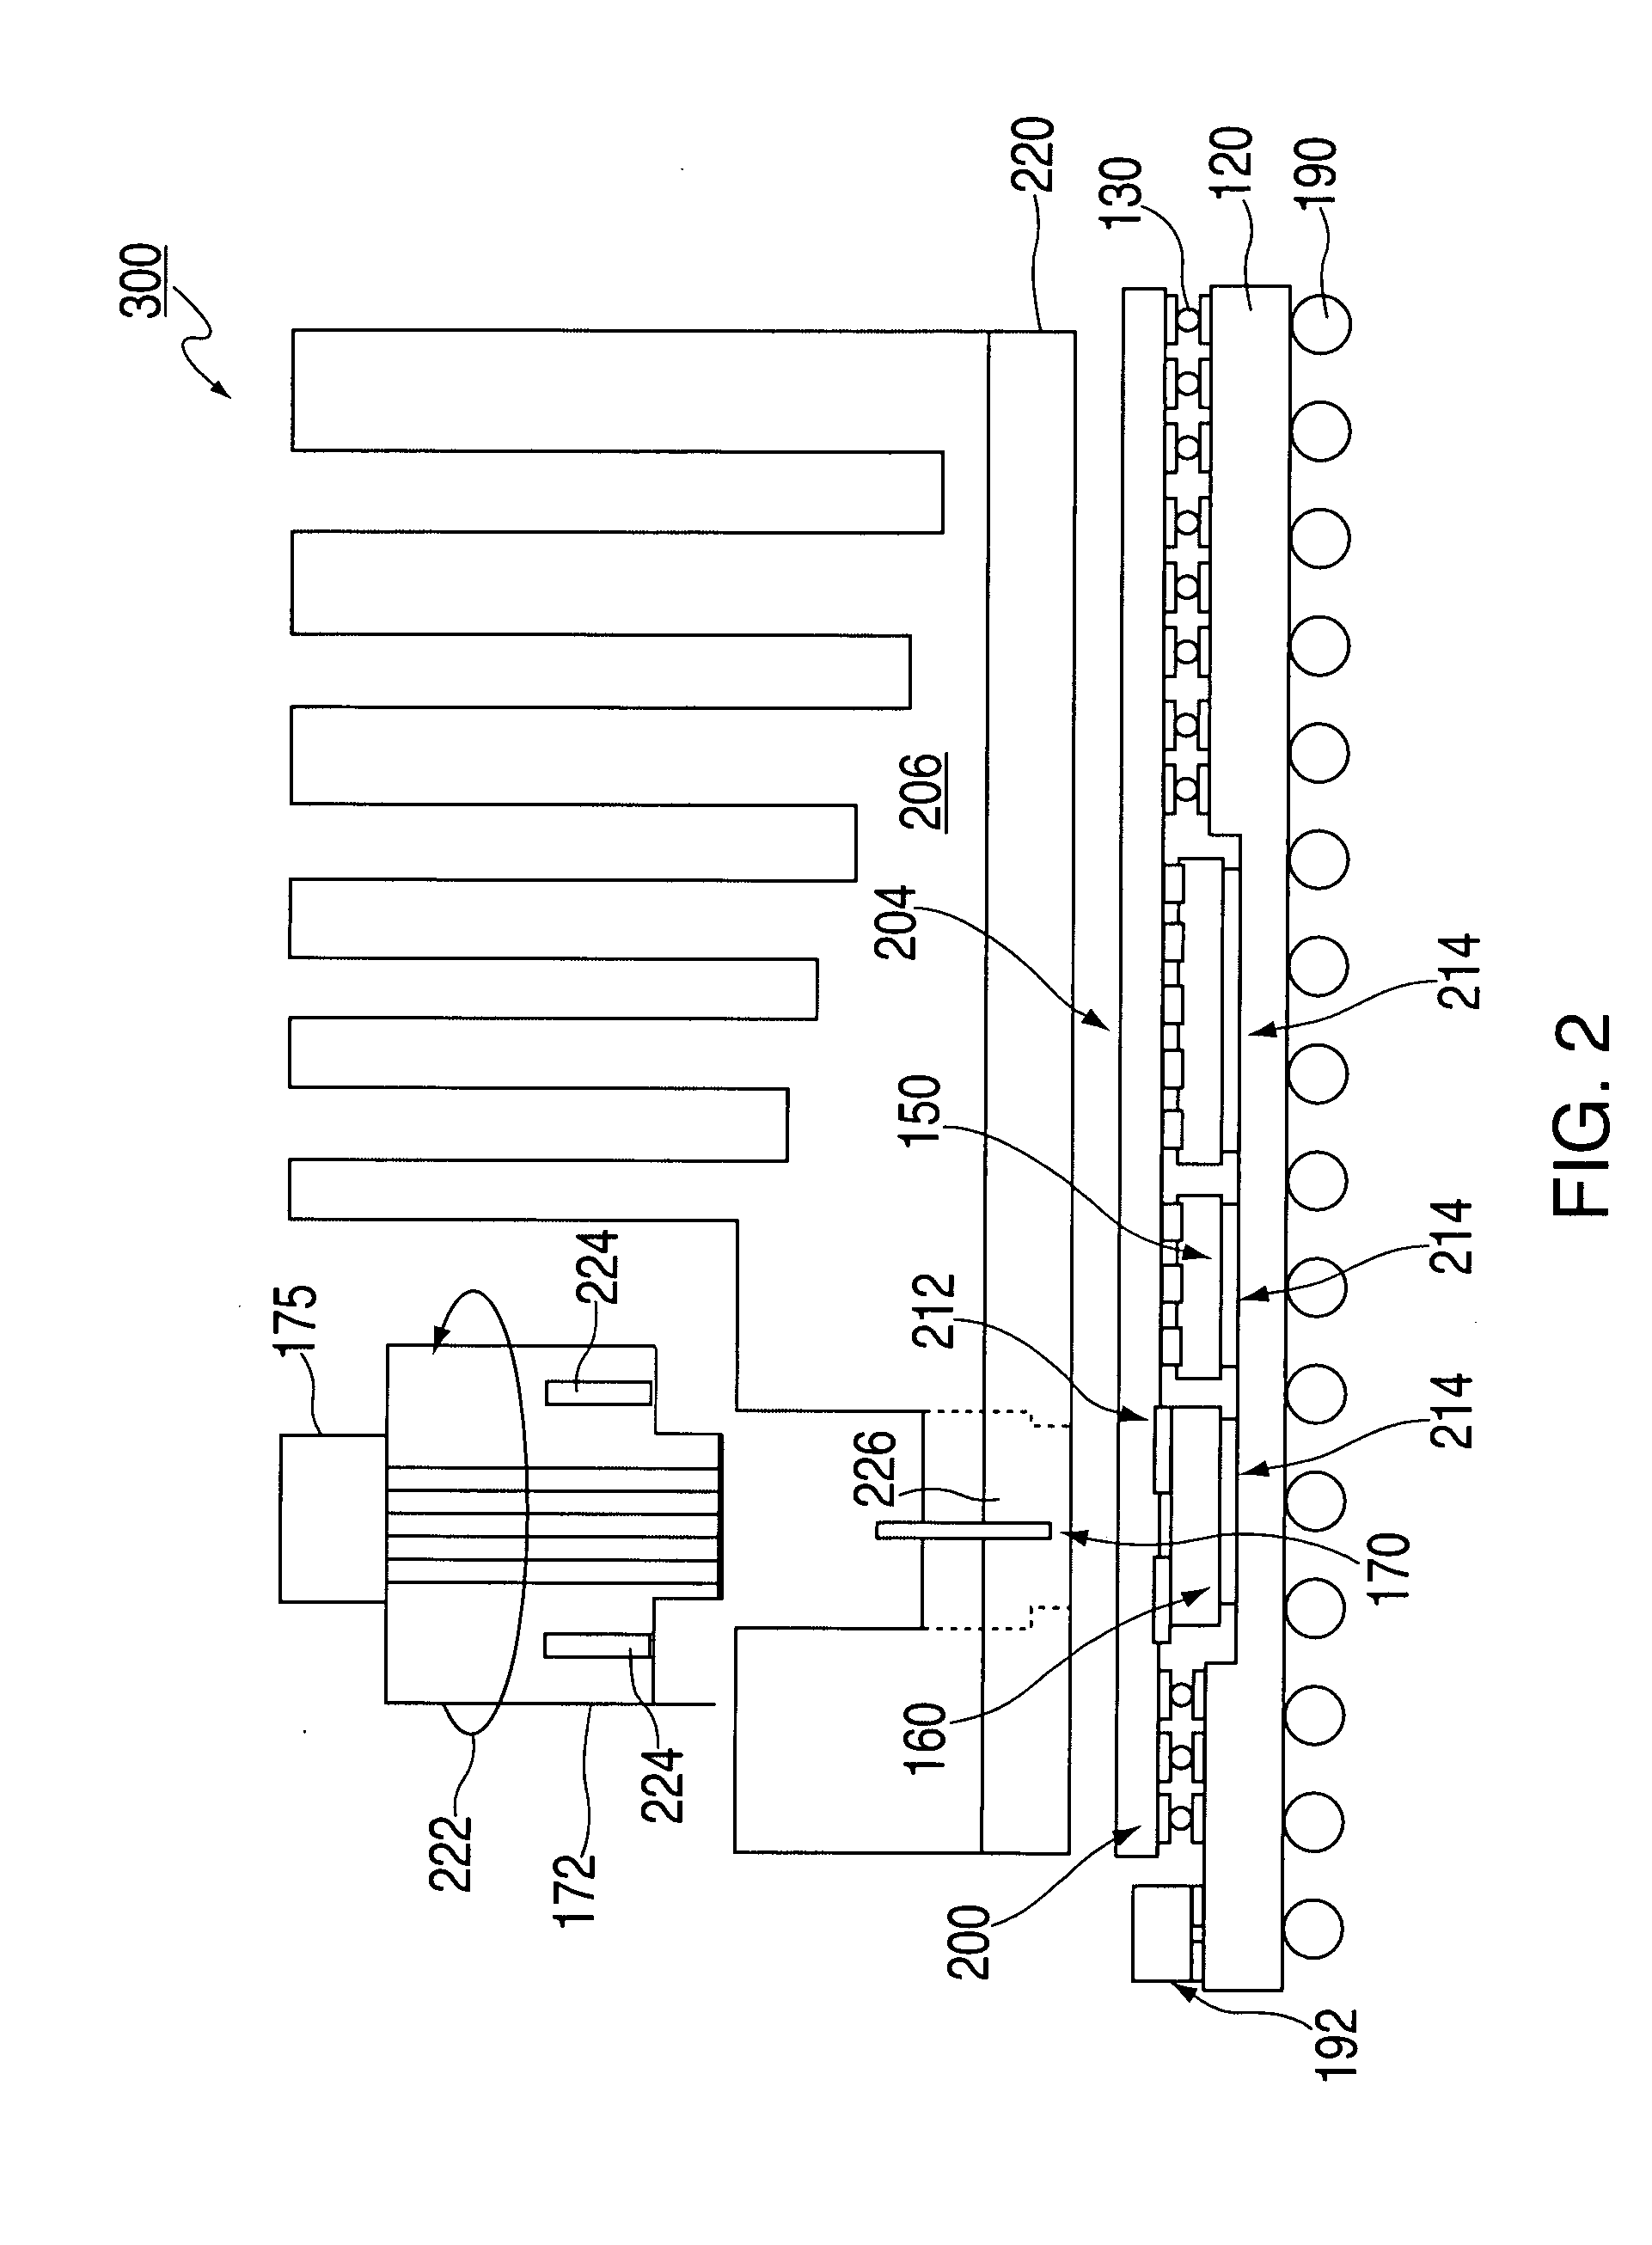 Method and apparatus for providing optoelectronic communication with an electronic device